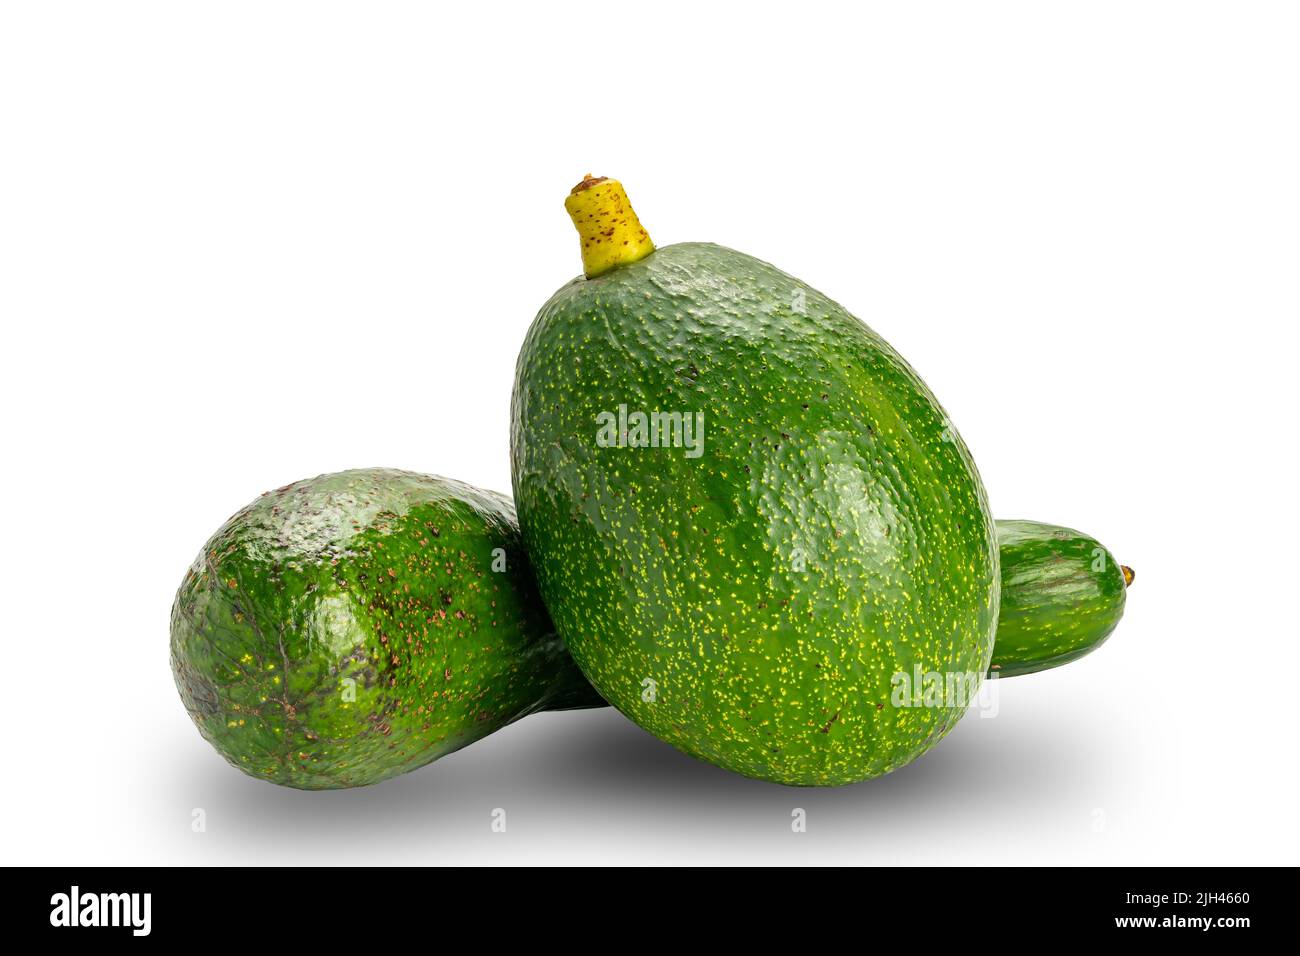 Two varieties of fresh green avocadoes fruit on white background with clipping path. Stock Photo